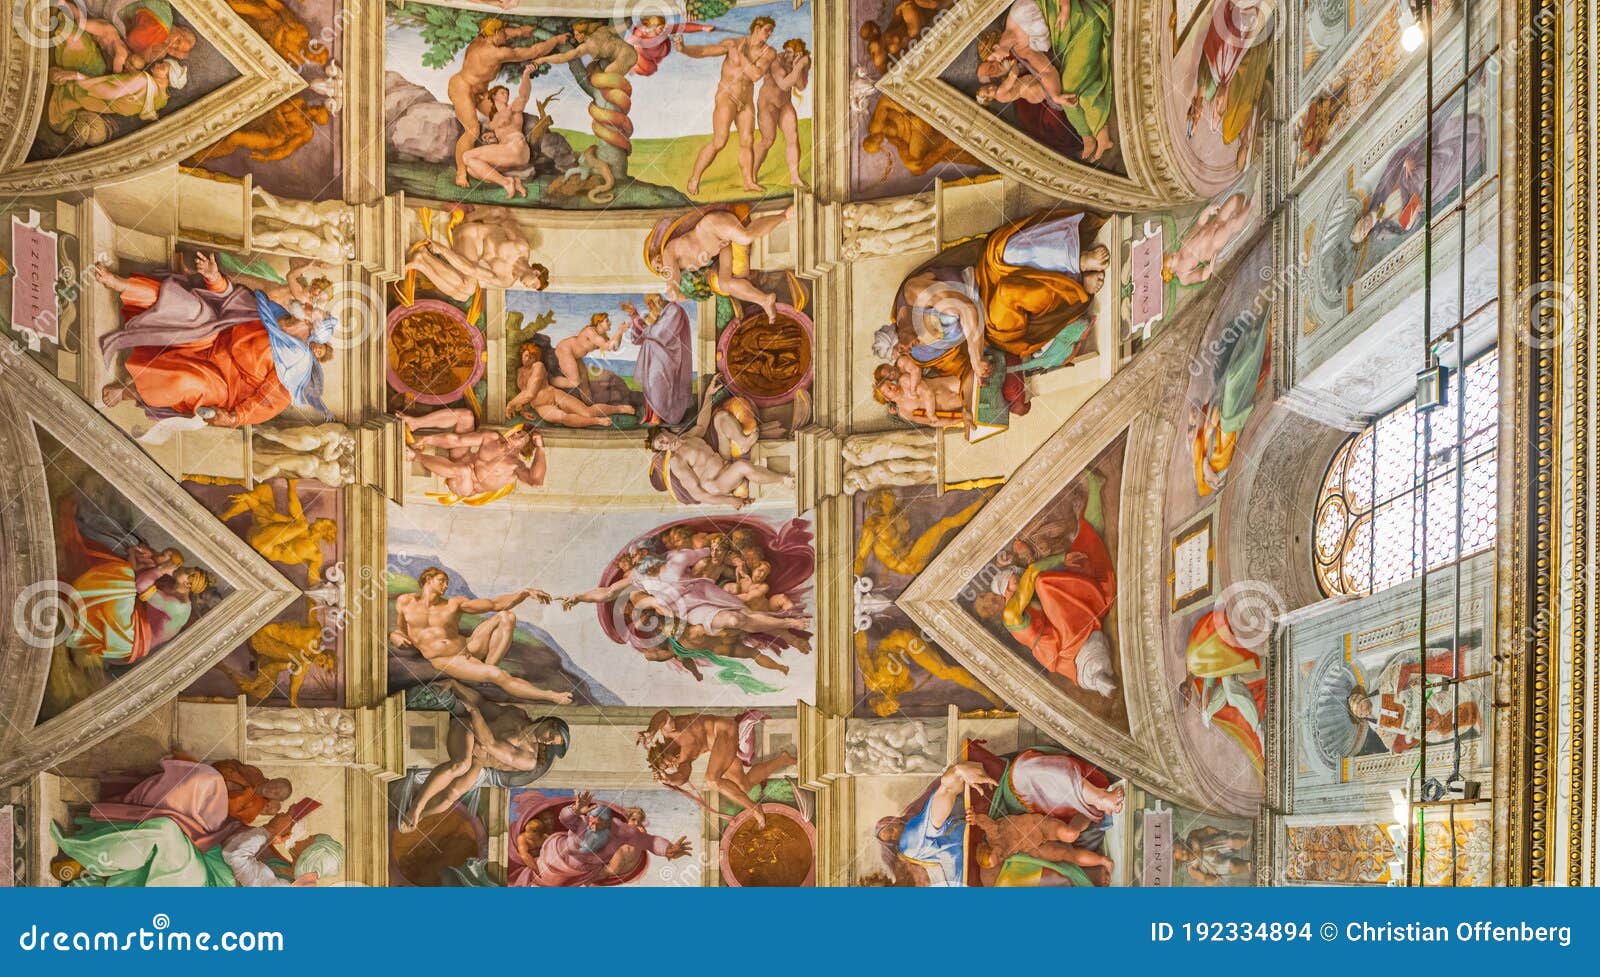 174 Adam Creation Sistine Chapel Photos Free Royalty Free Stock Photos From Dreamstime